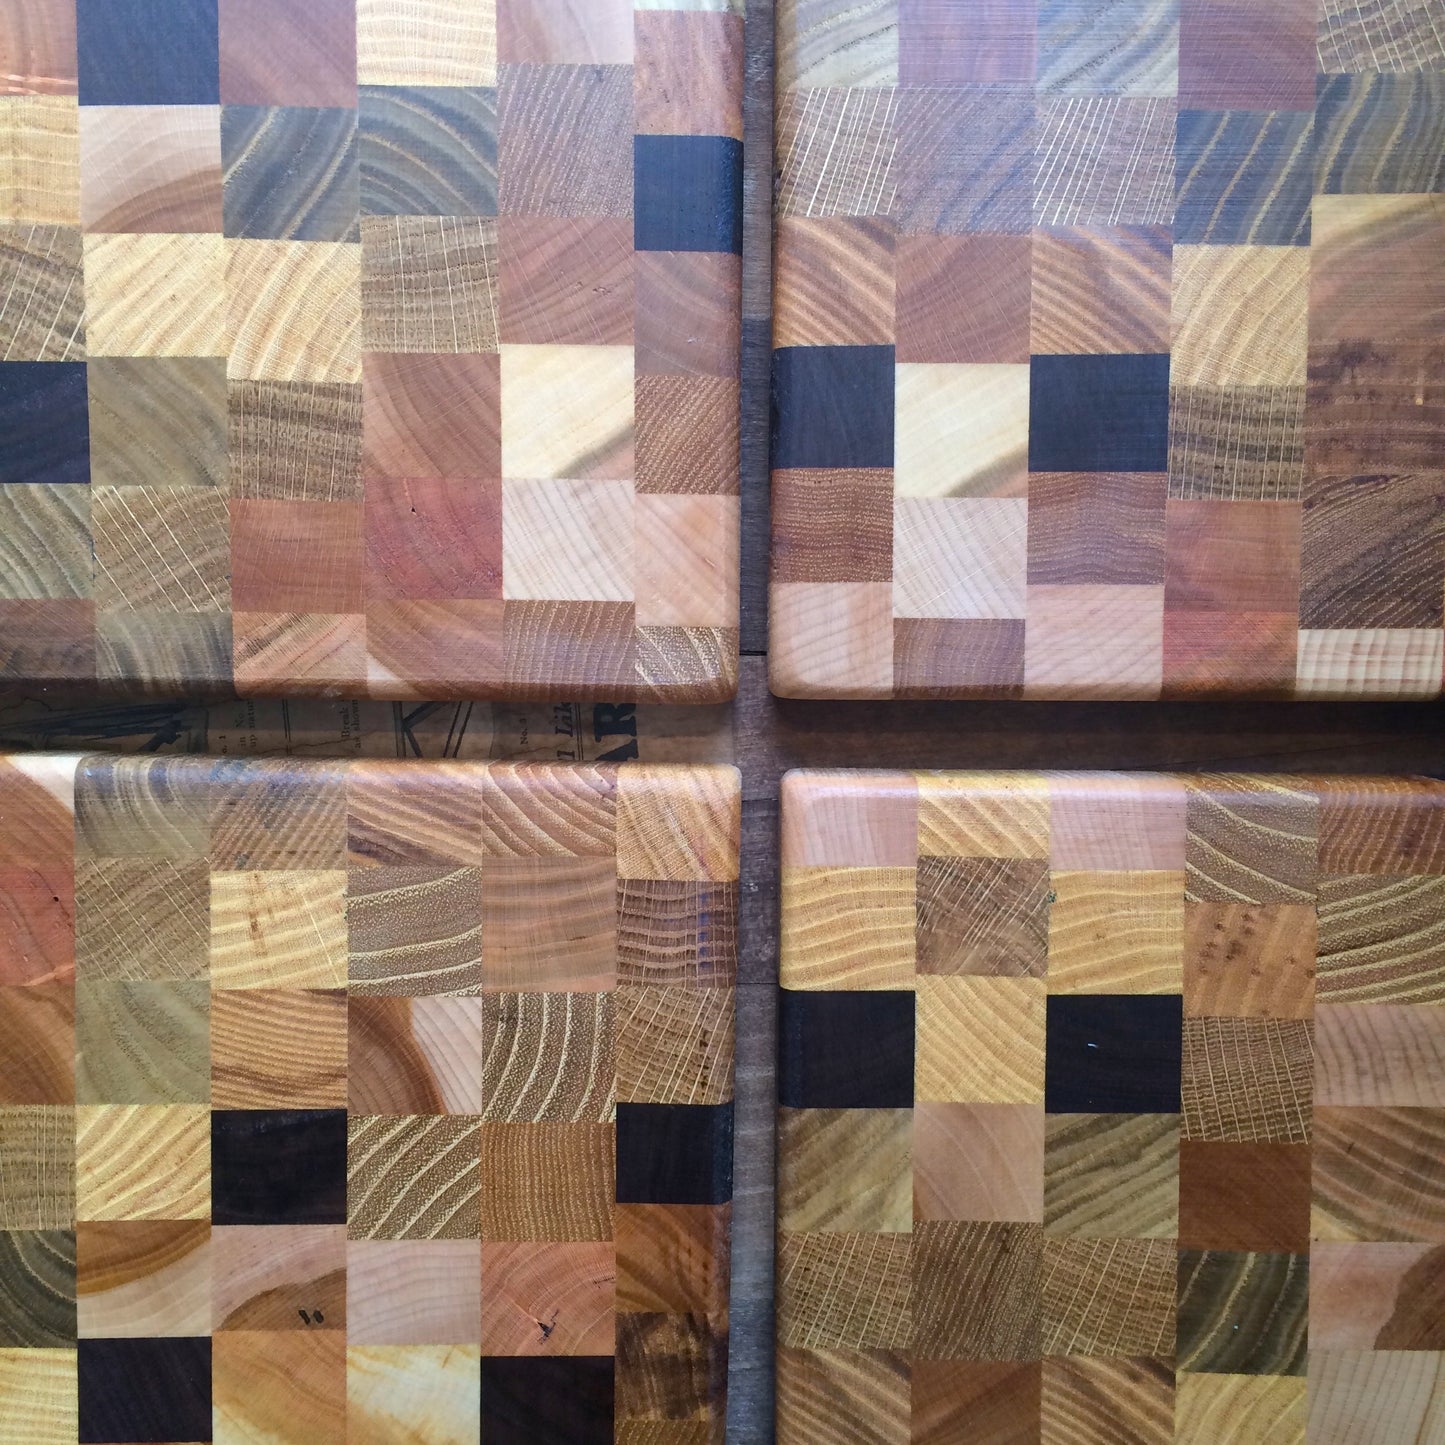 Four Steve Reid Checkerboard Wood Cutting Boards with checkerboard patterns of various light and dark wood tones.